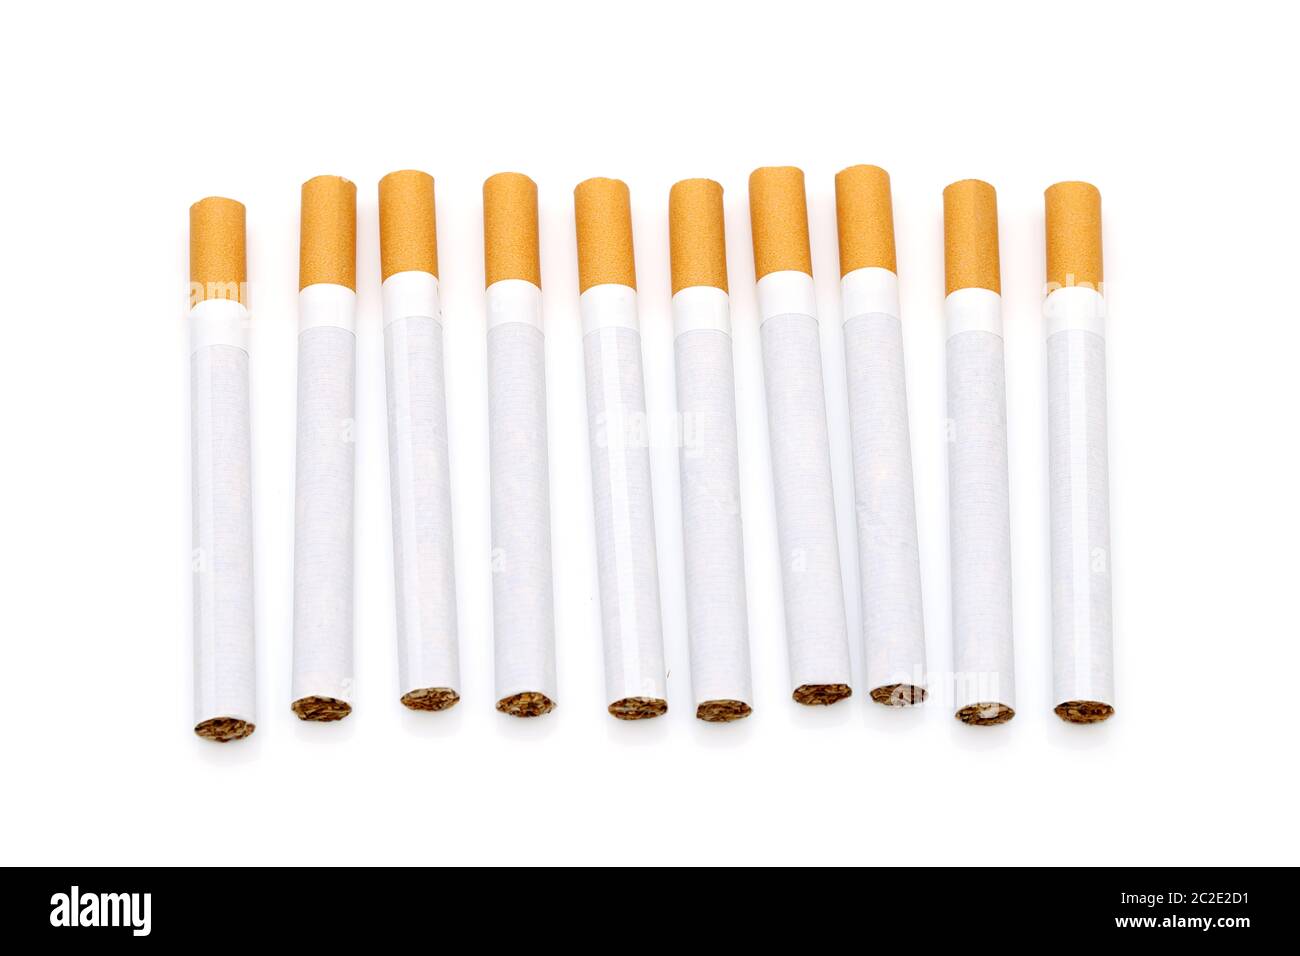 Row of cigarettes on a white background Stock Photo